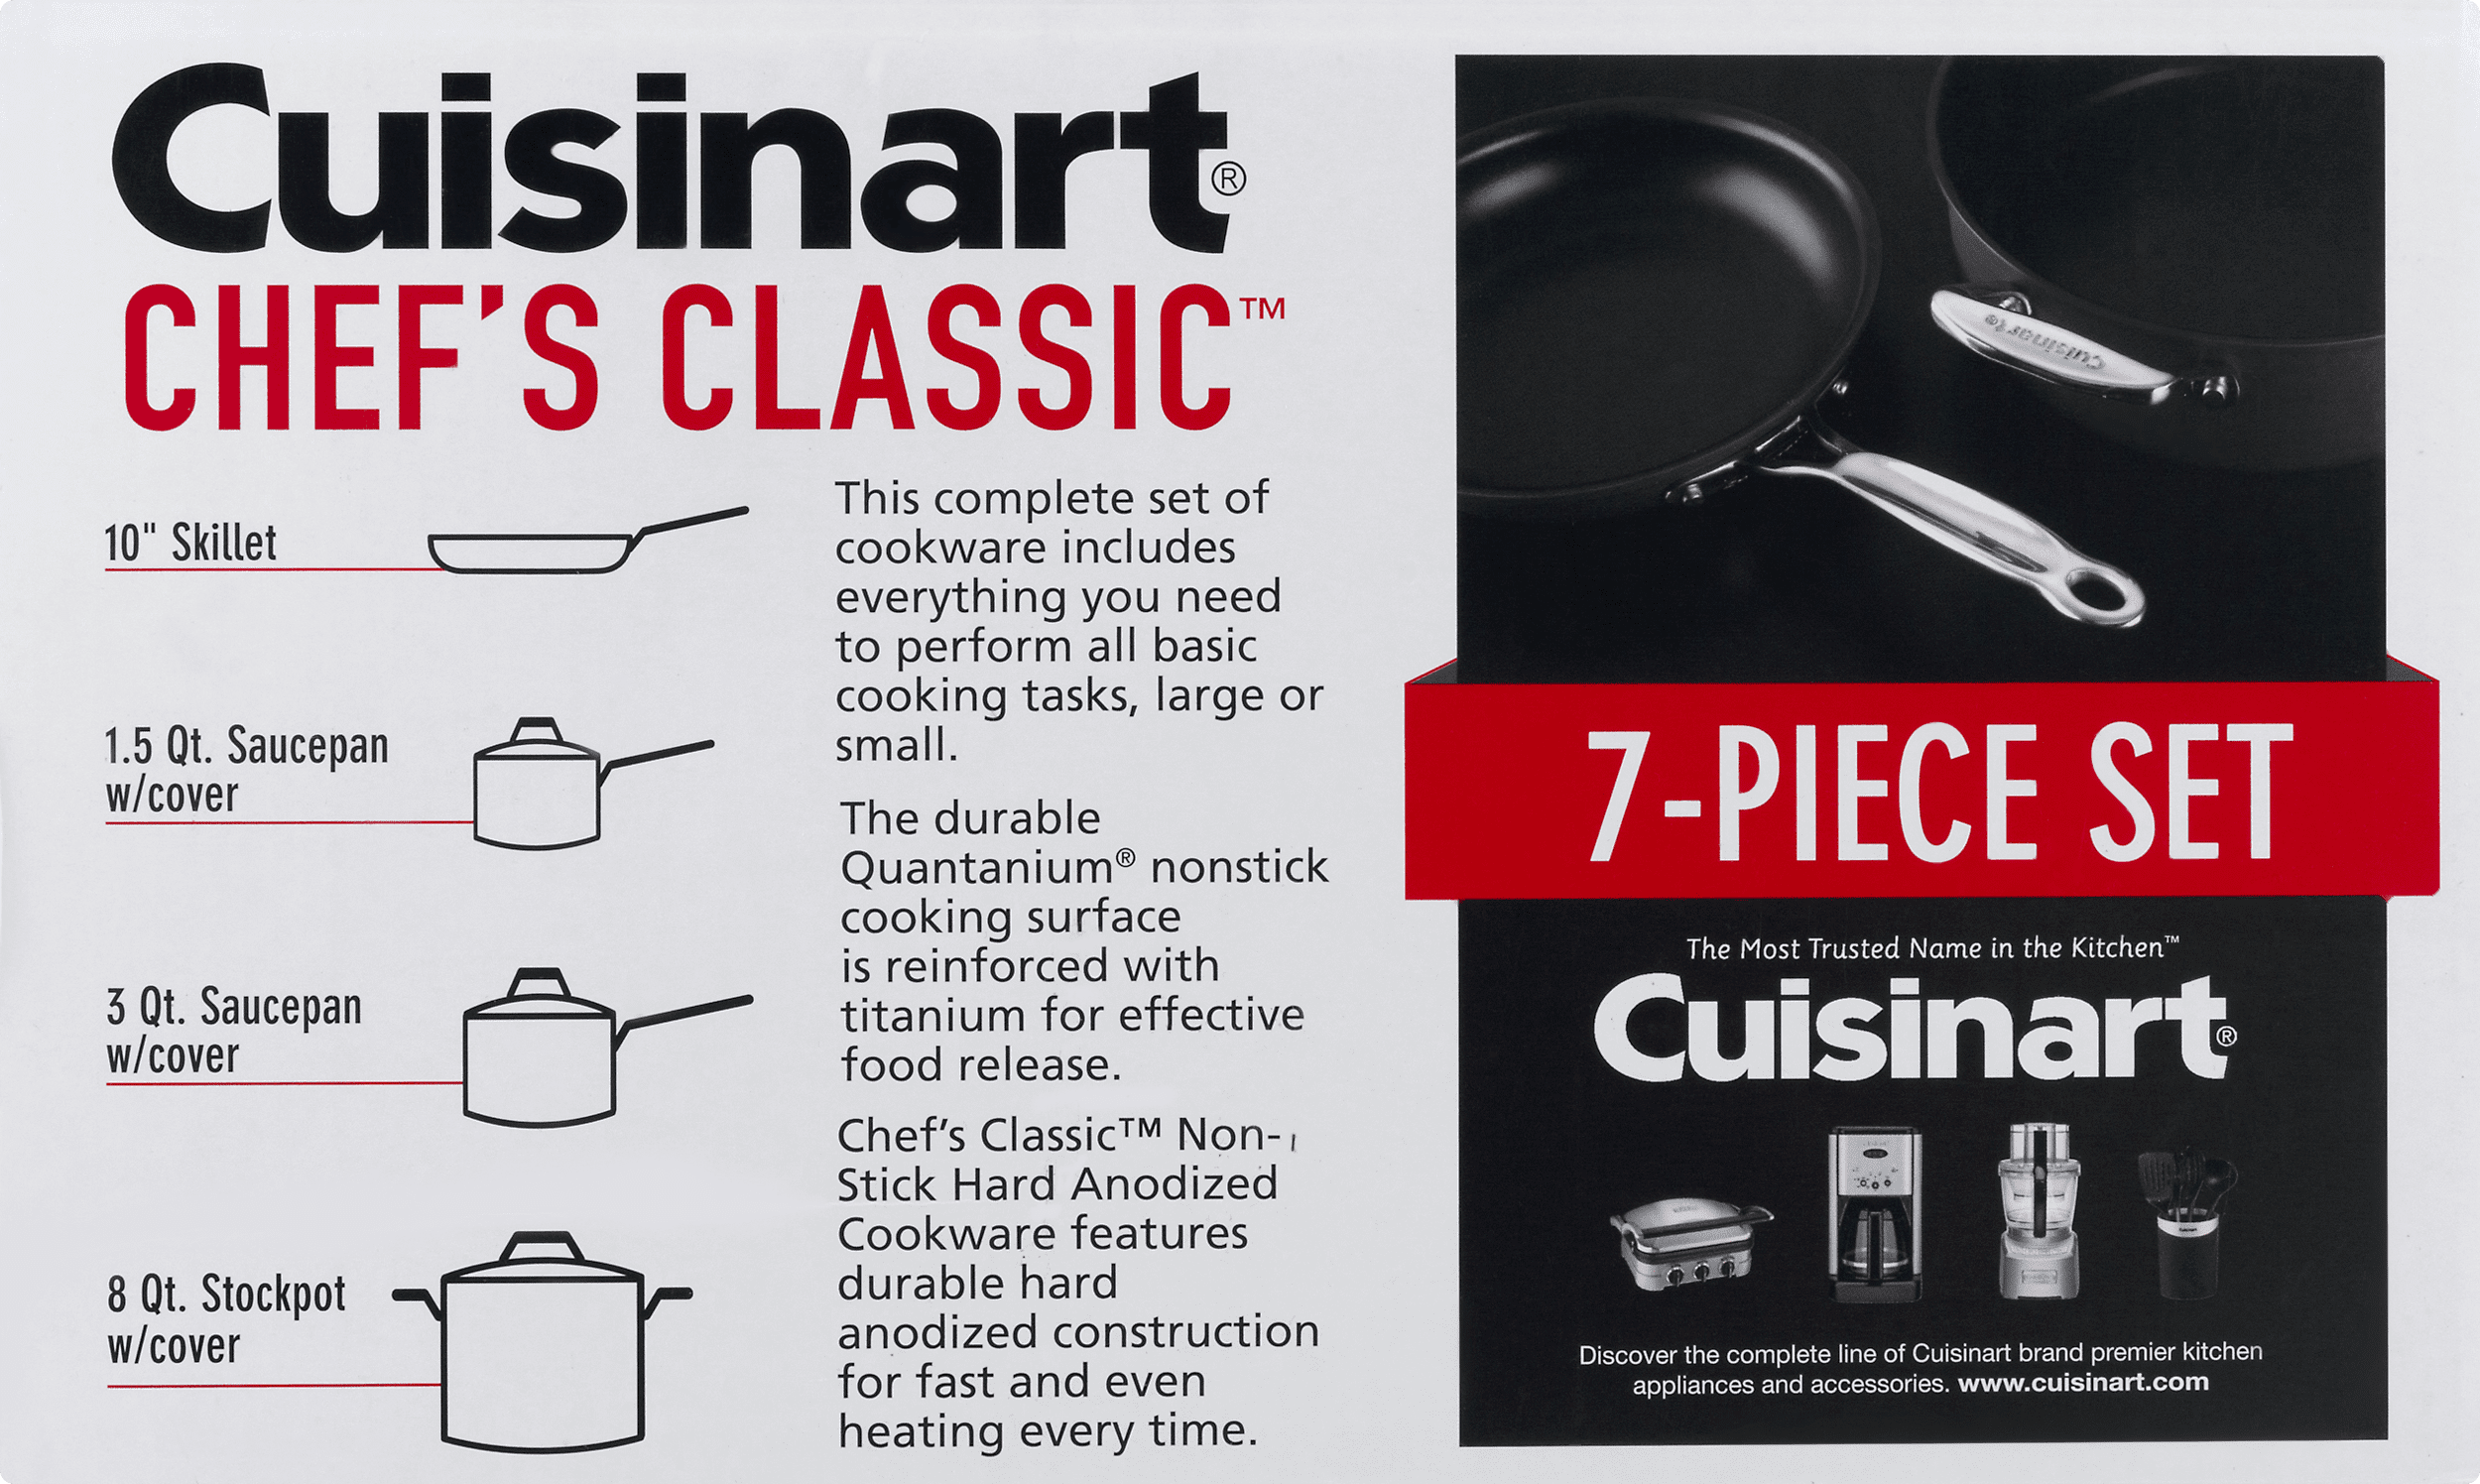 Tracy Cooks in Austin: Cuisinart cookware; why you should NOT buy it